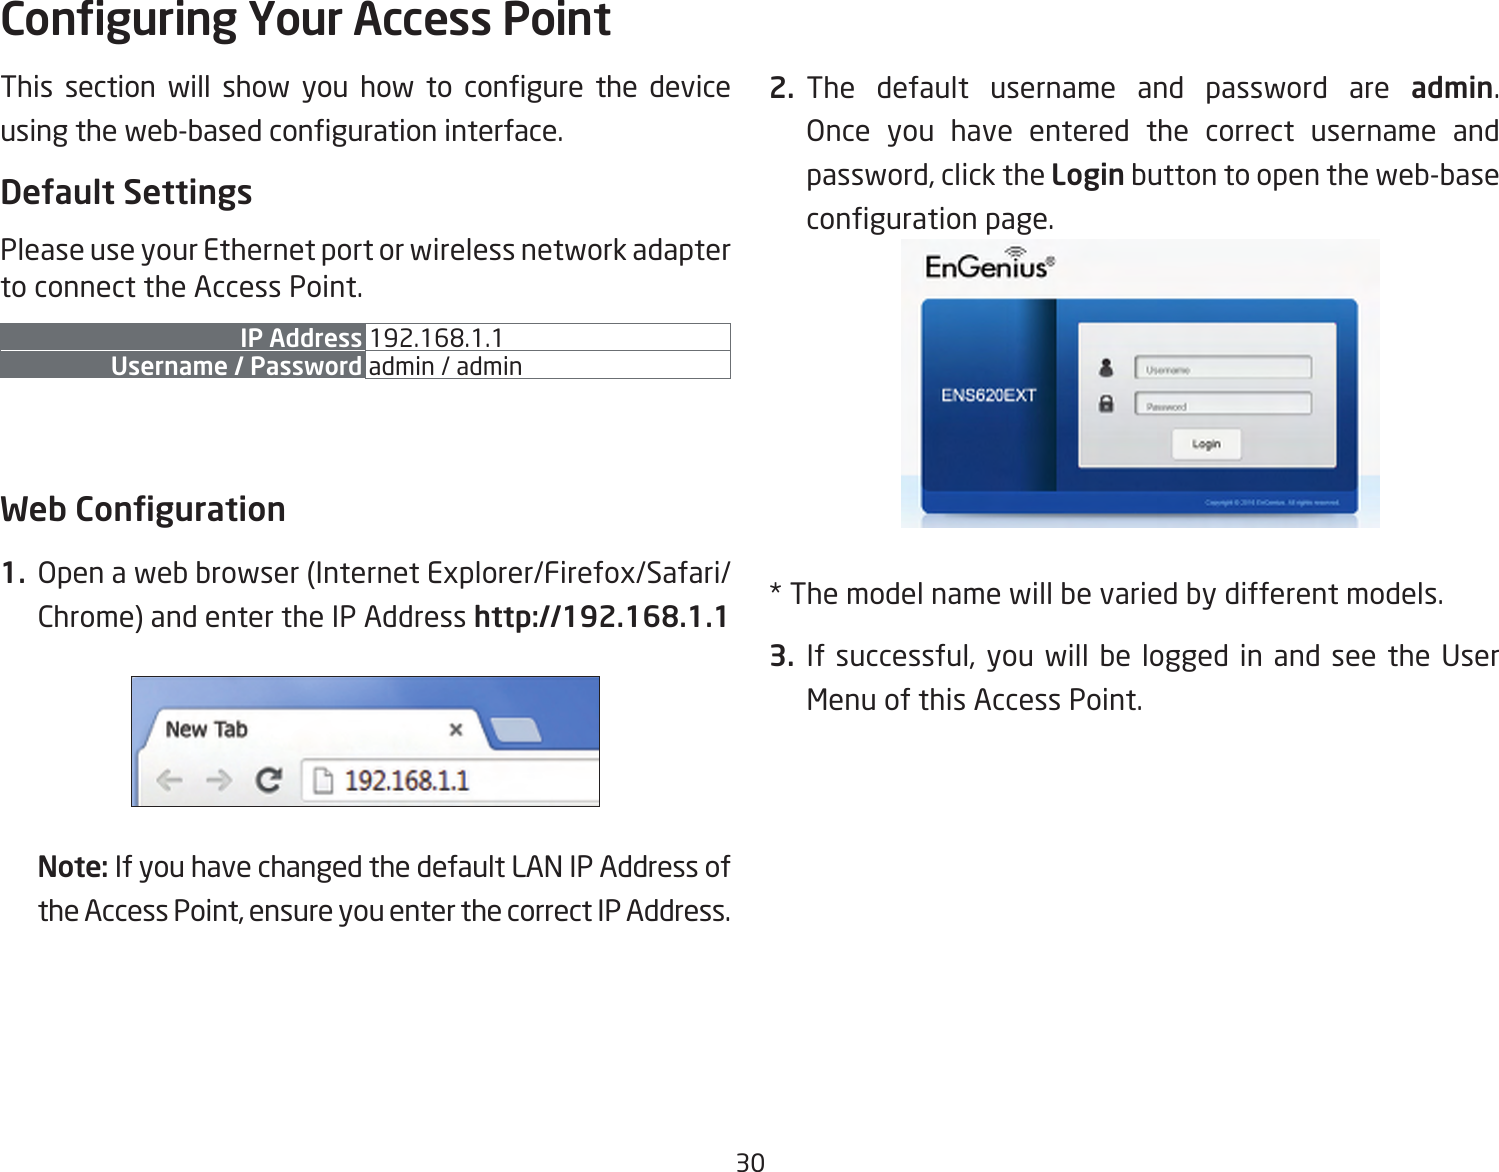 30This section will show you how to congure the deviceusingtheweb-basedcongurationinterface.Default SettingsPlease use your Ethernet port or wireless network adapter to connect the Access Point.IP Address 192.168.1.1Username / Password admin / admin Web Conguration1.  Openawebbrowser(InternetExplorer/Firefox/Safari/Chrome)andentertheIPAddresshttp://192.168.1.1Note: If you have changed the default LAN IP Address of theAccessPoint,ensureyouenterthecorrectIPAddress.2. The default username and password are admin. Once you have entered the correct username and password,clicktheLogin button to open the web-base congurationpage.*Themodelnamewillbevariedbydifferentmodels.3. Ifsuccessful,youwillbe loggedin andsee theUserMenu of this Access Point.Conguring Your Access Point